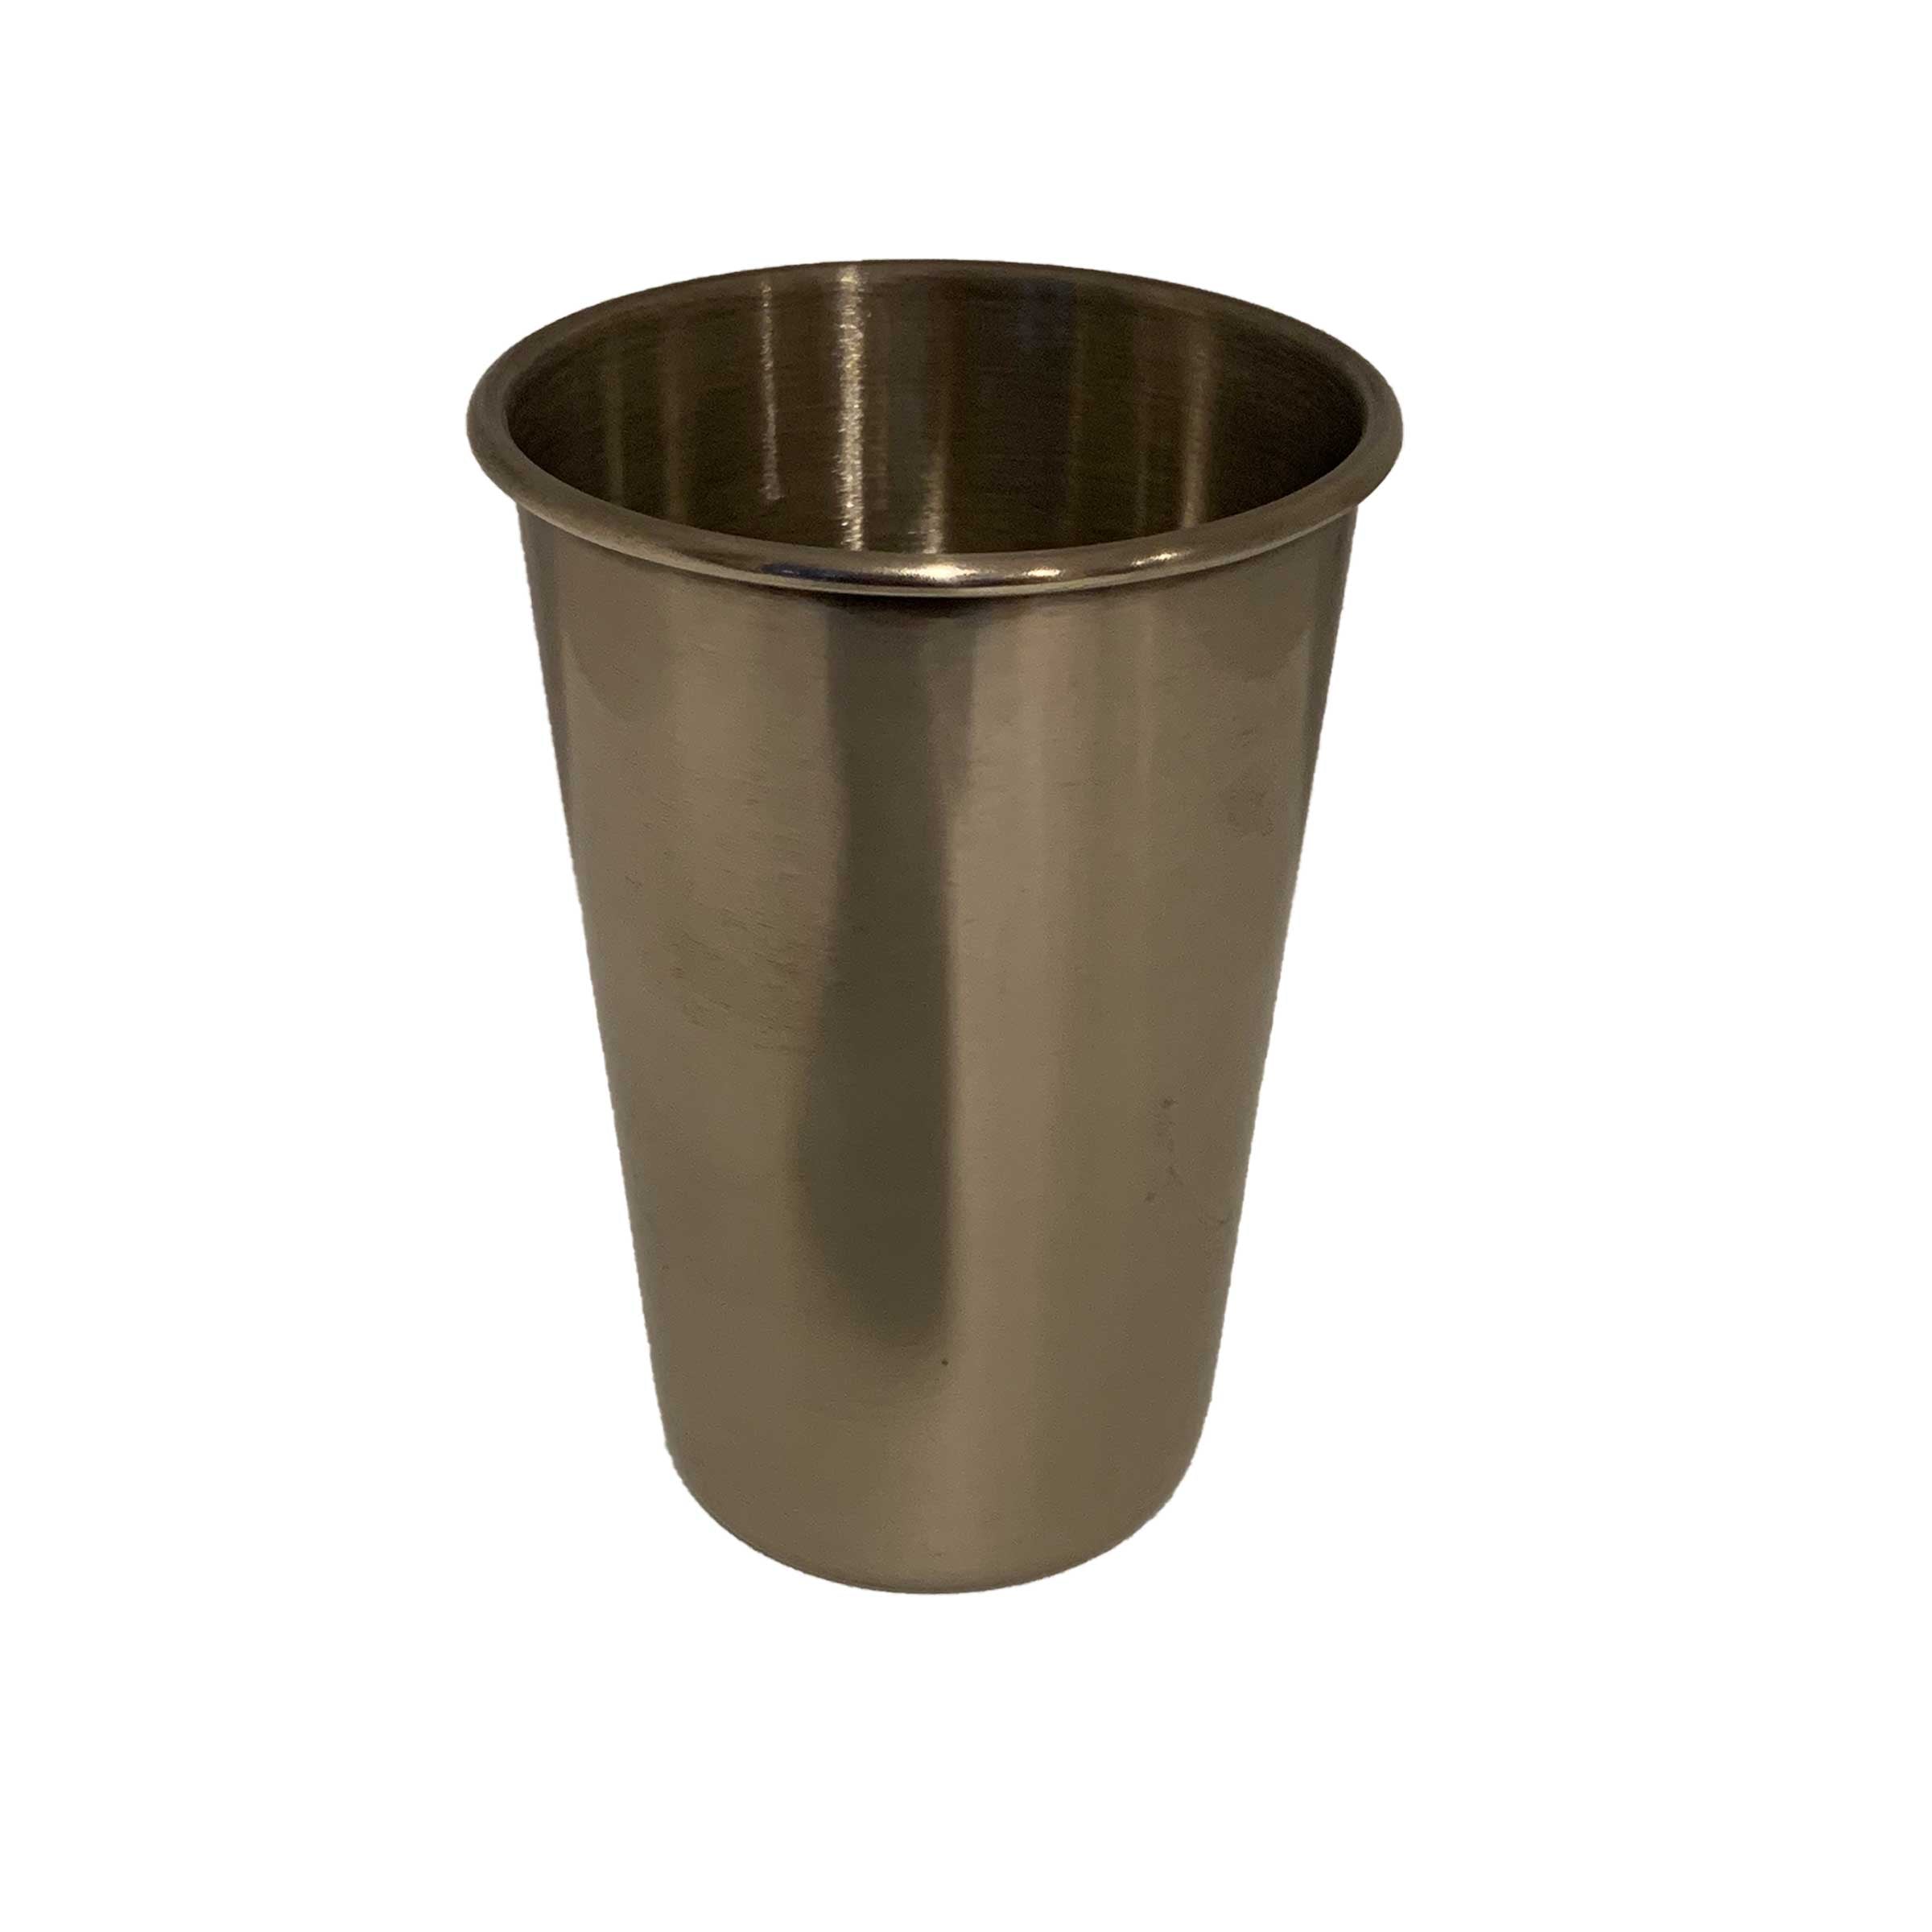 The Stainless Steel Cup 17oz